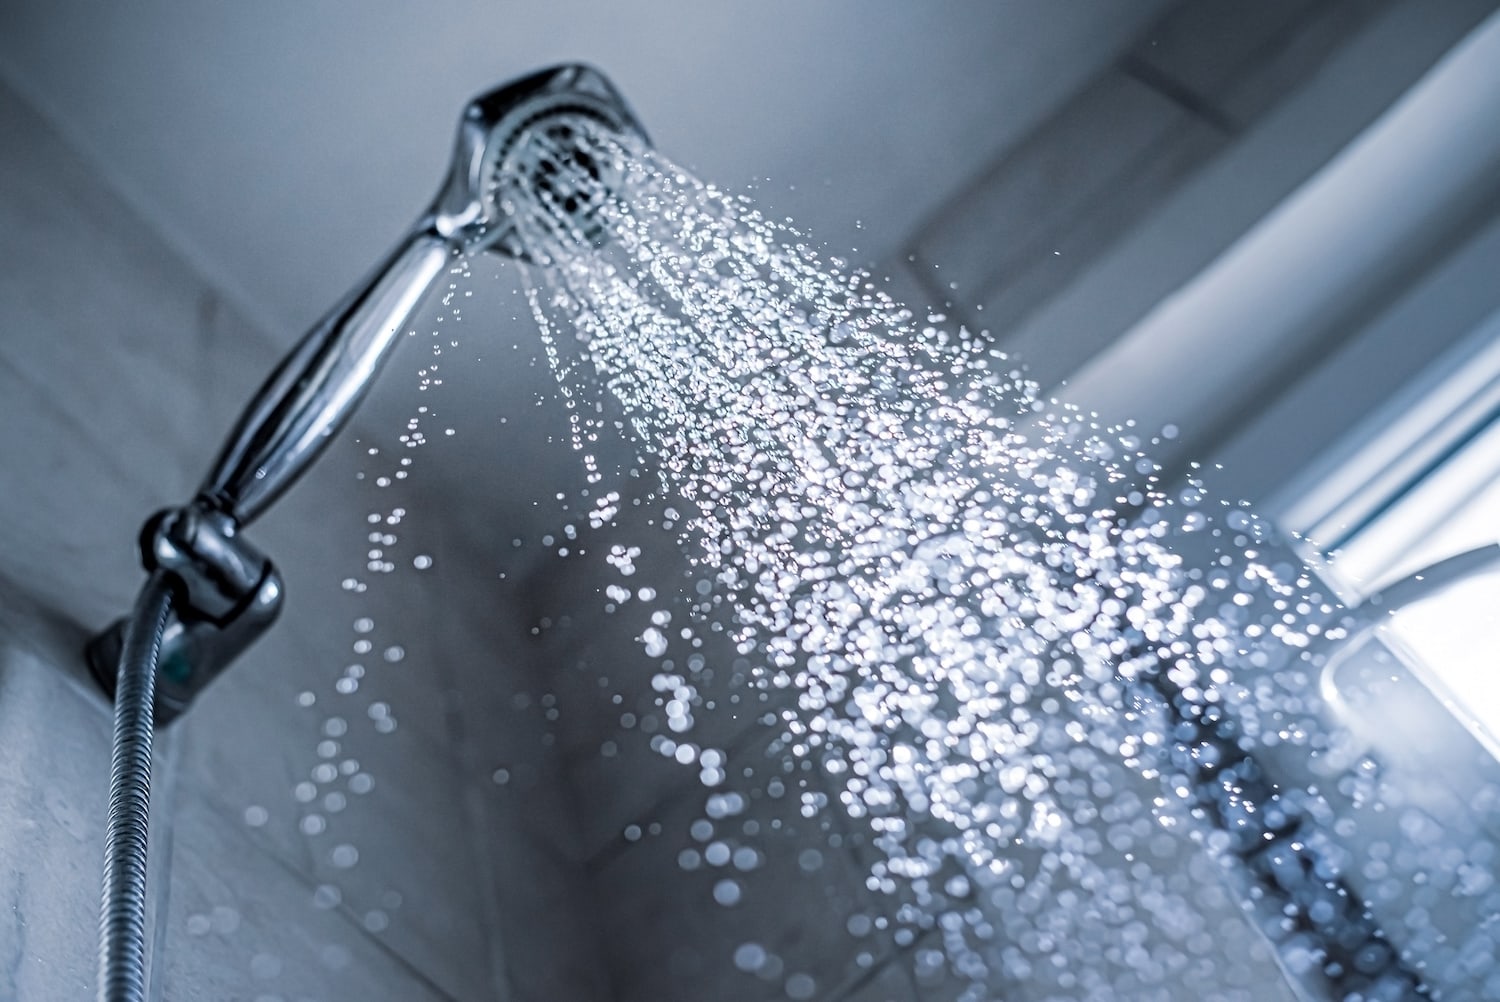 How to increase water pressure in shower